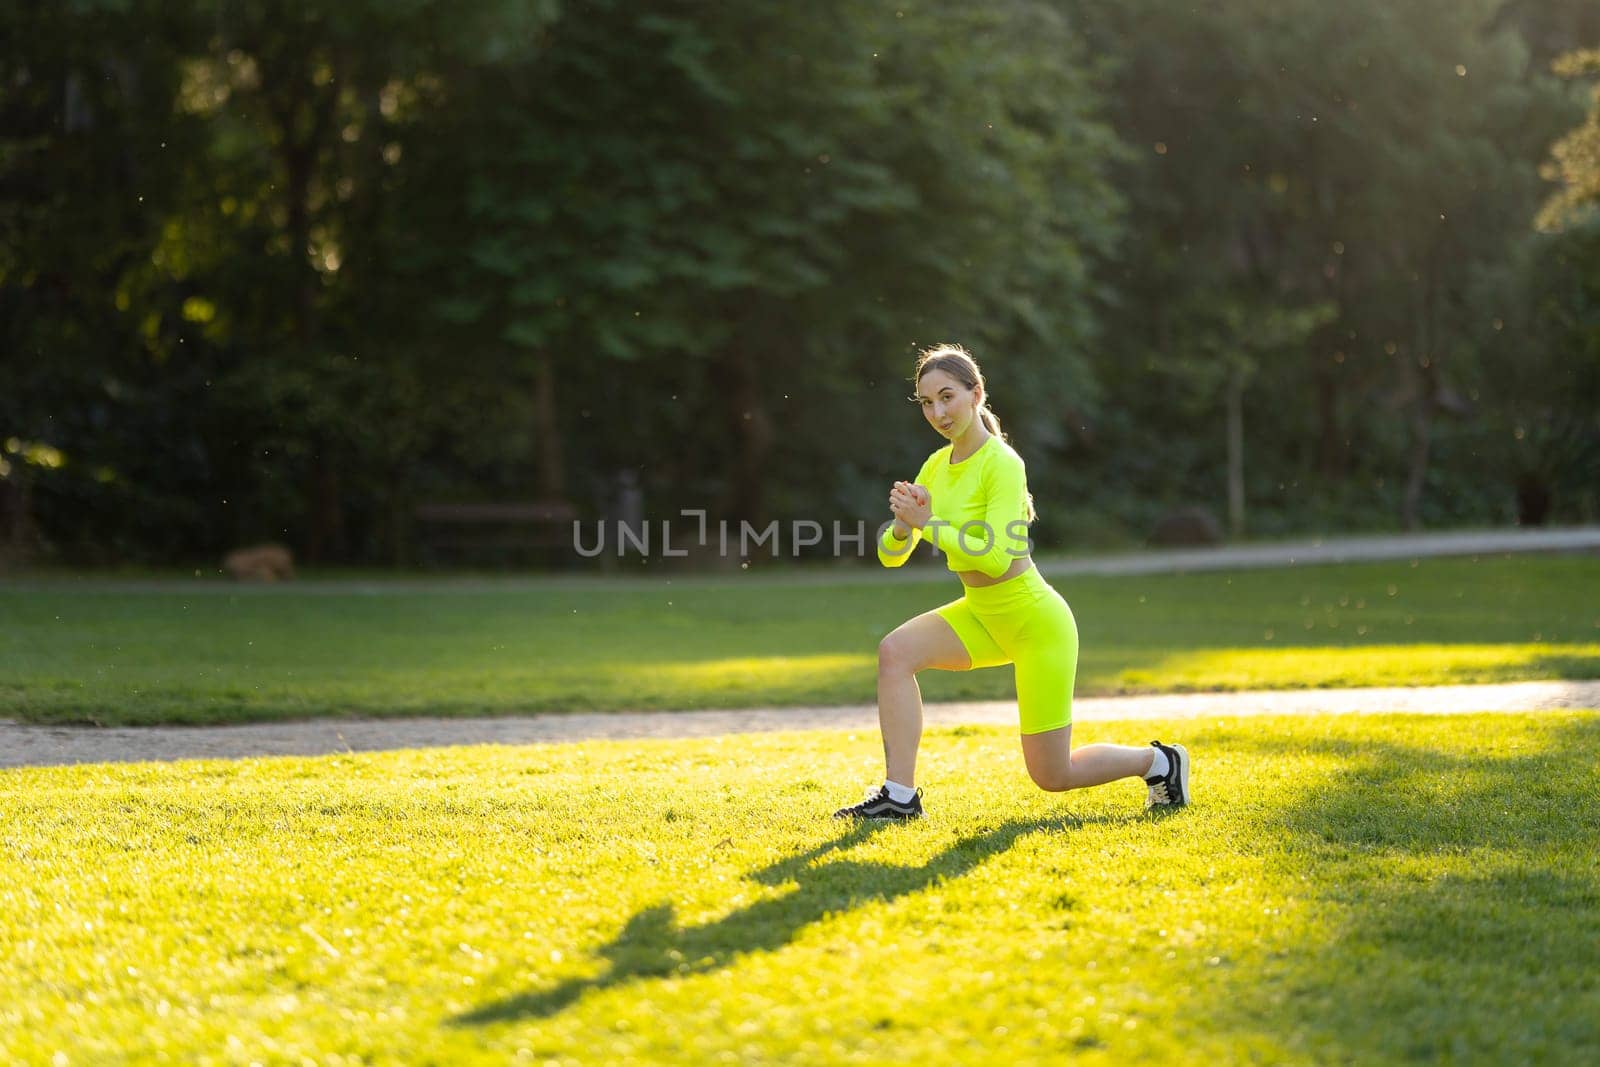 A woman in a neon green outfit is doing a yoga pose on a grassy field. The bright colors of her outfit and the lush green surroundings create a sense of energy and vitality